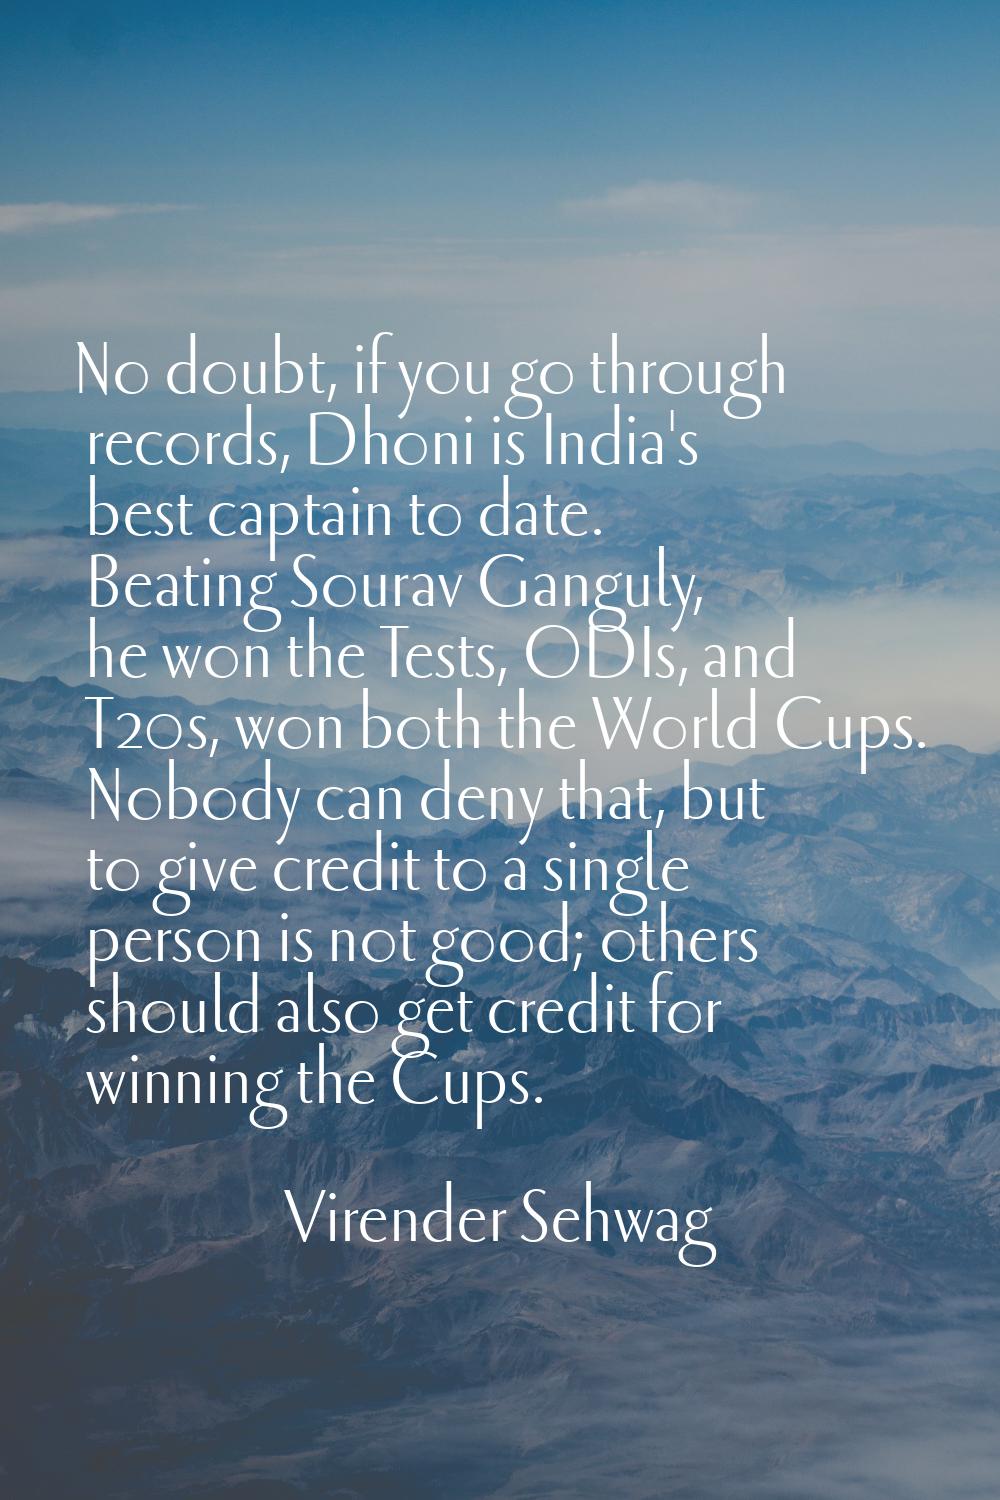 No doubt, if you go through records, Dhoni is India's best captain to date. Beating Sourav Ganguly,